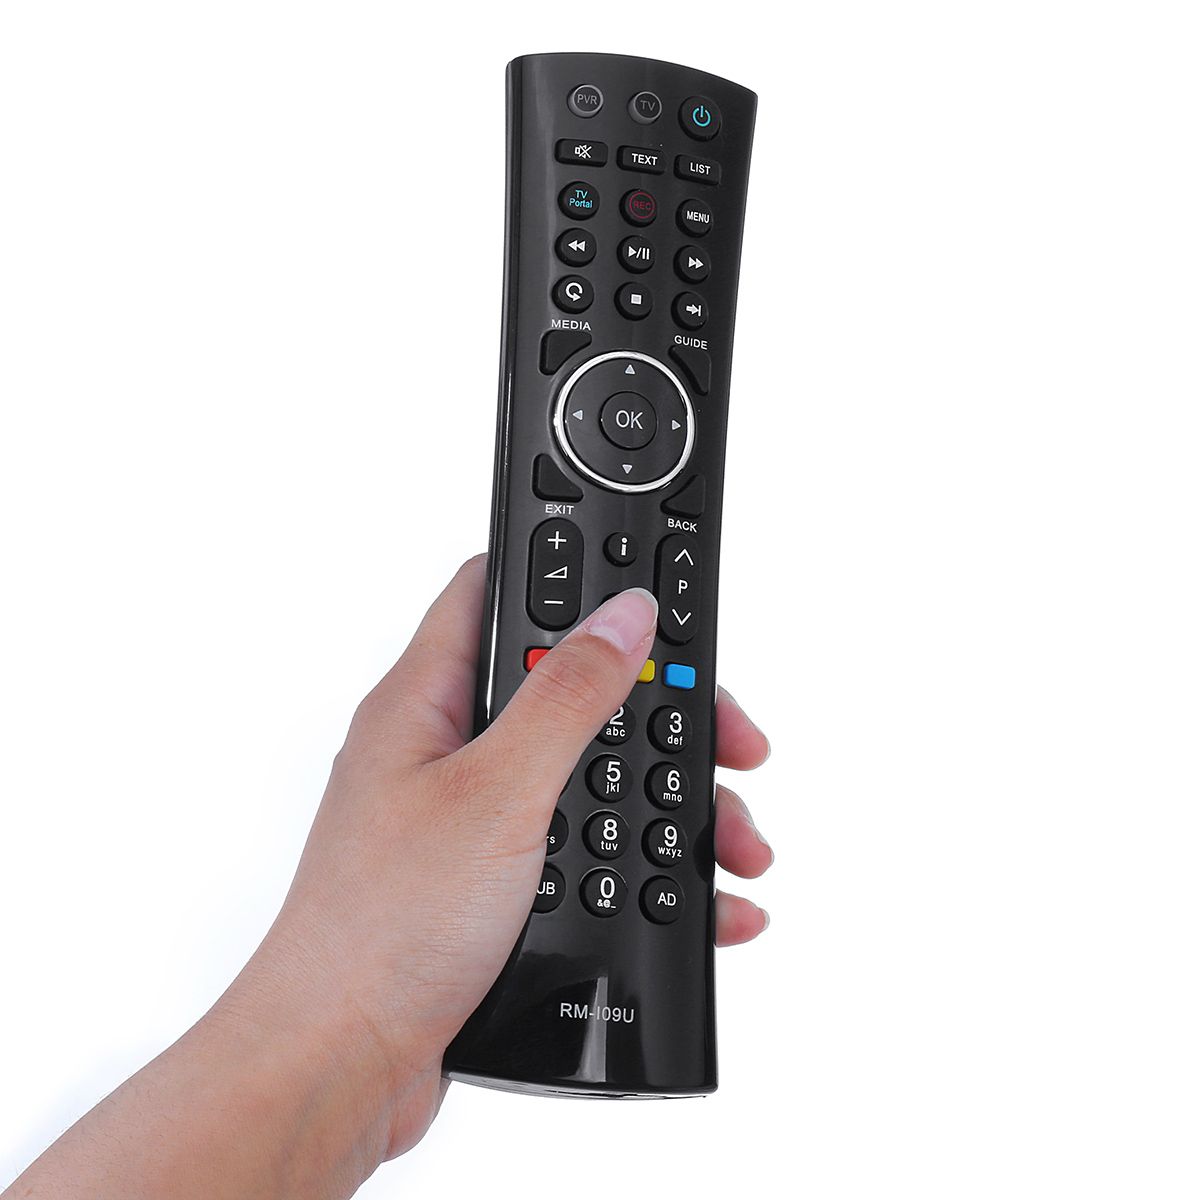 RC3902-Replacement-TV-Remote-Control-for-Humax-RM-I08U-HDR-1000S1100-TV-1688862